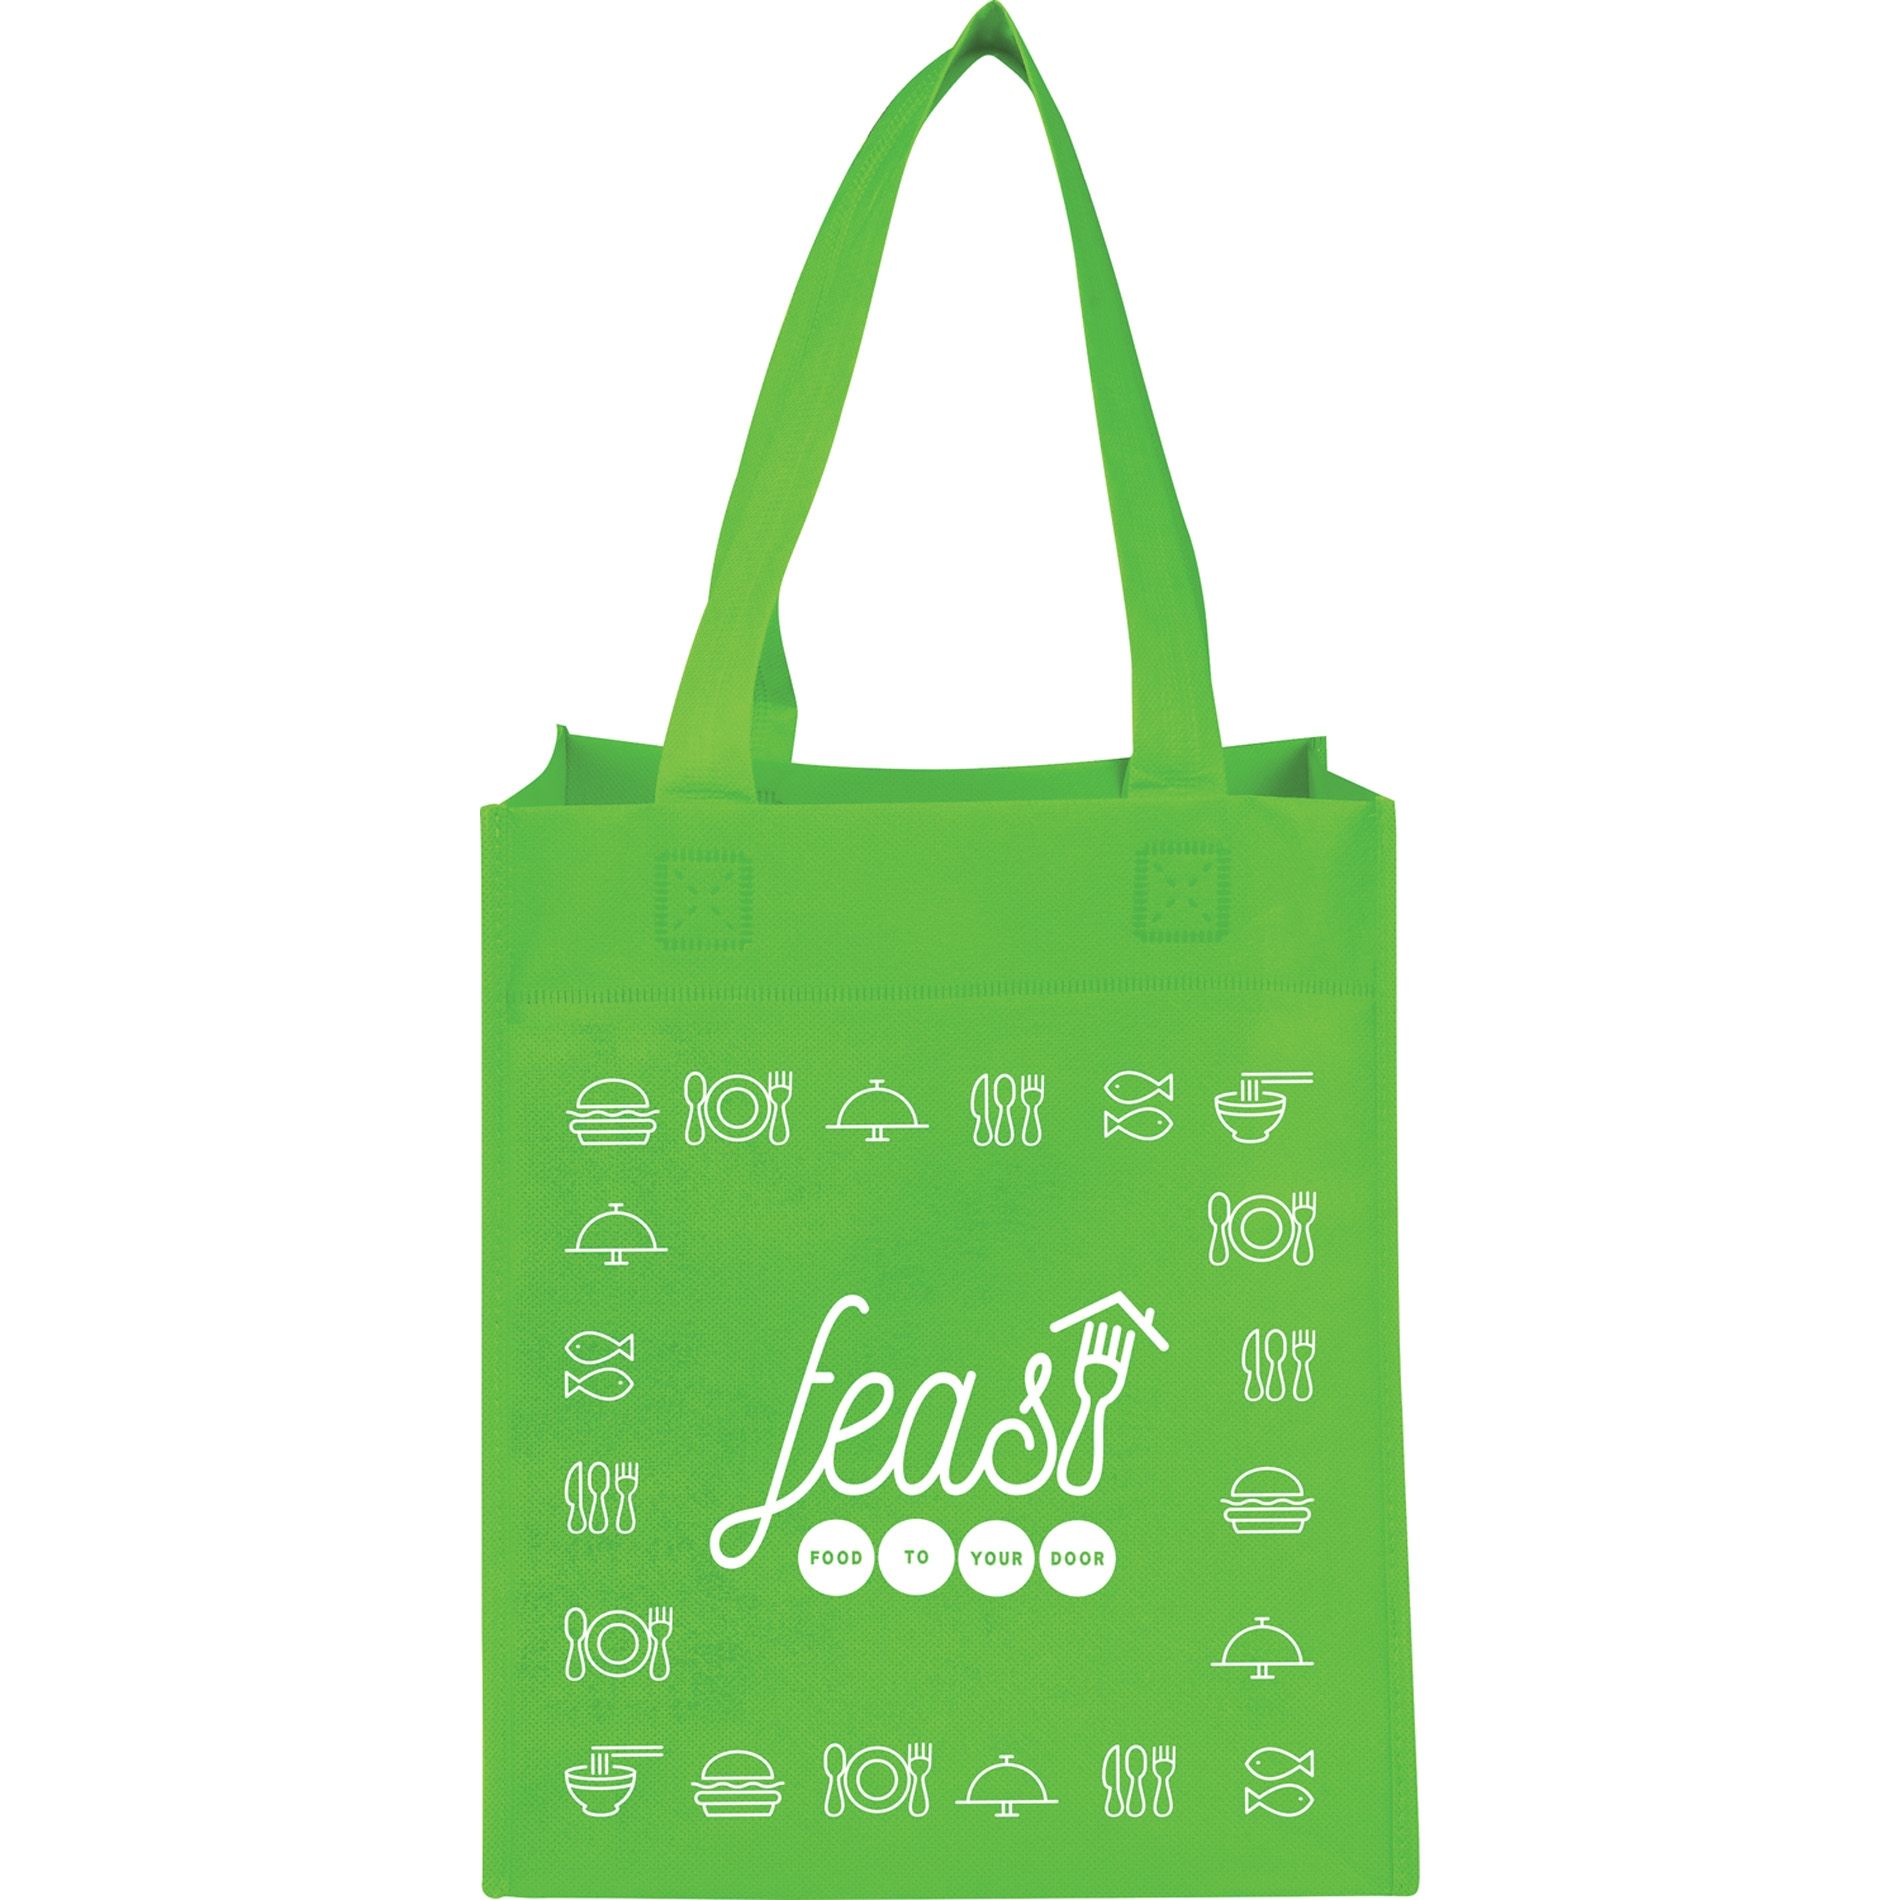 Custom Non-Woven Grocery Promotional Tote Bag - 10.5"w X 11.75"h X 8"d